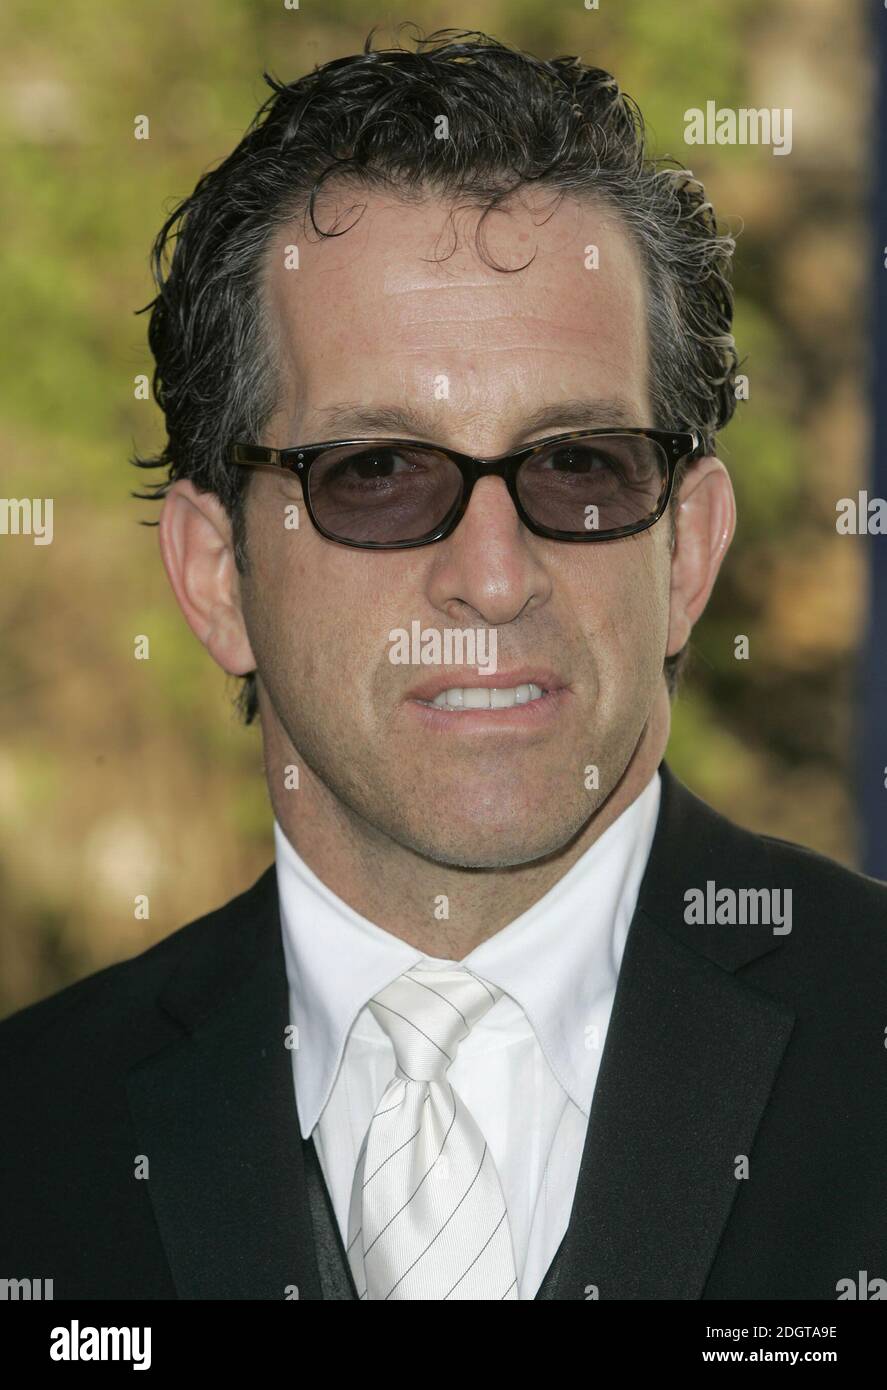 Kenneth Cole arriving Stock Photo - Alamy